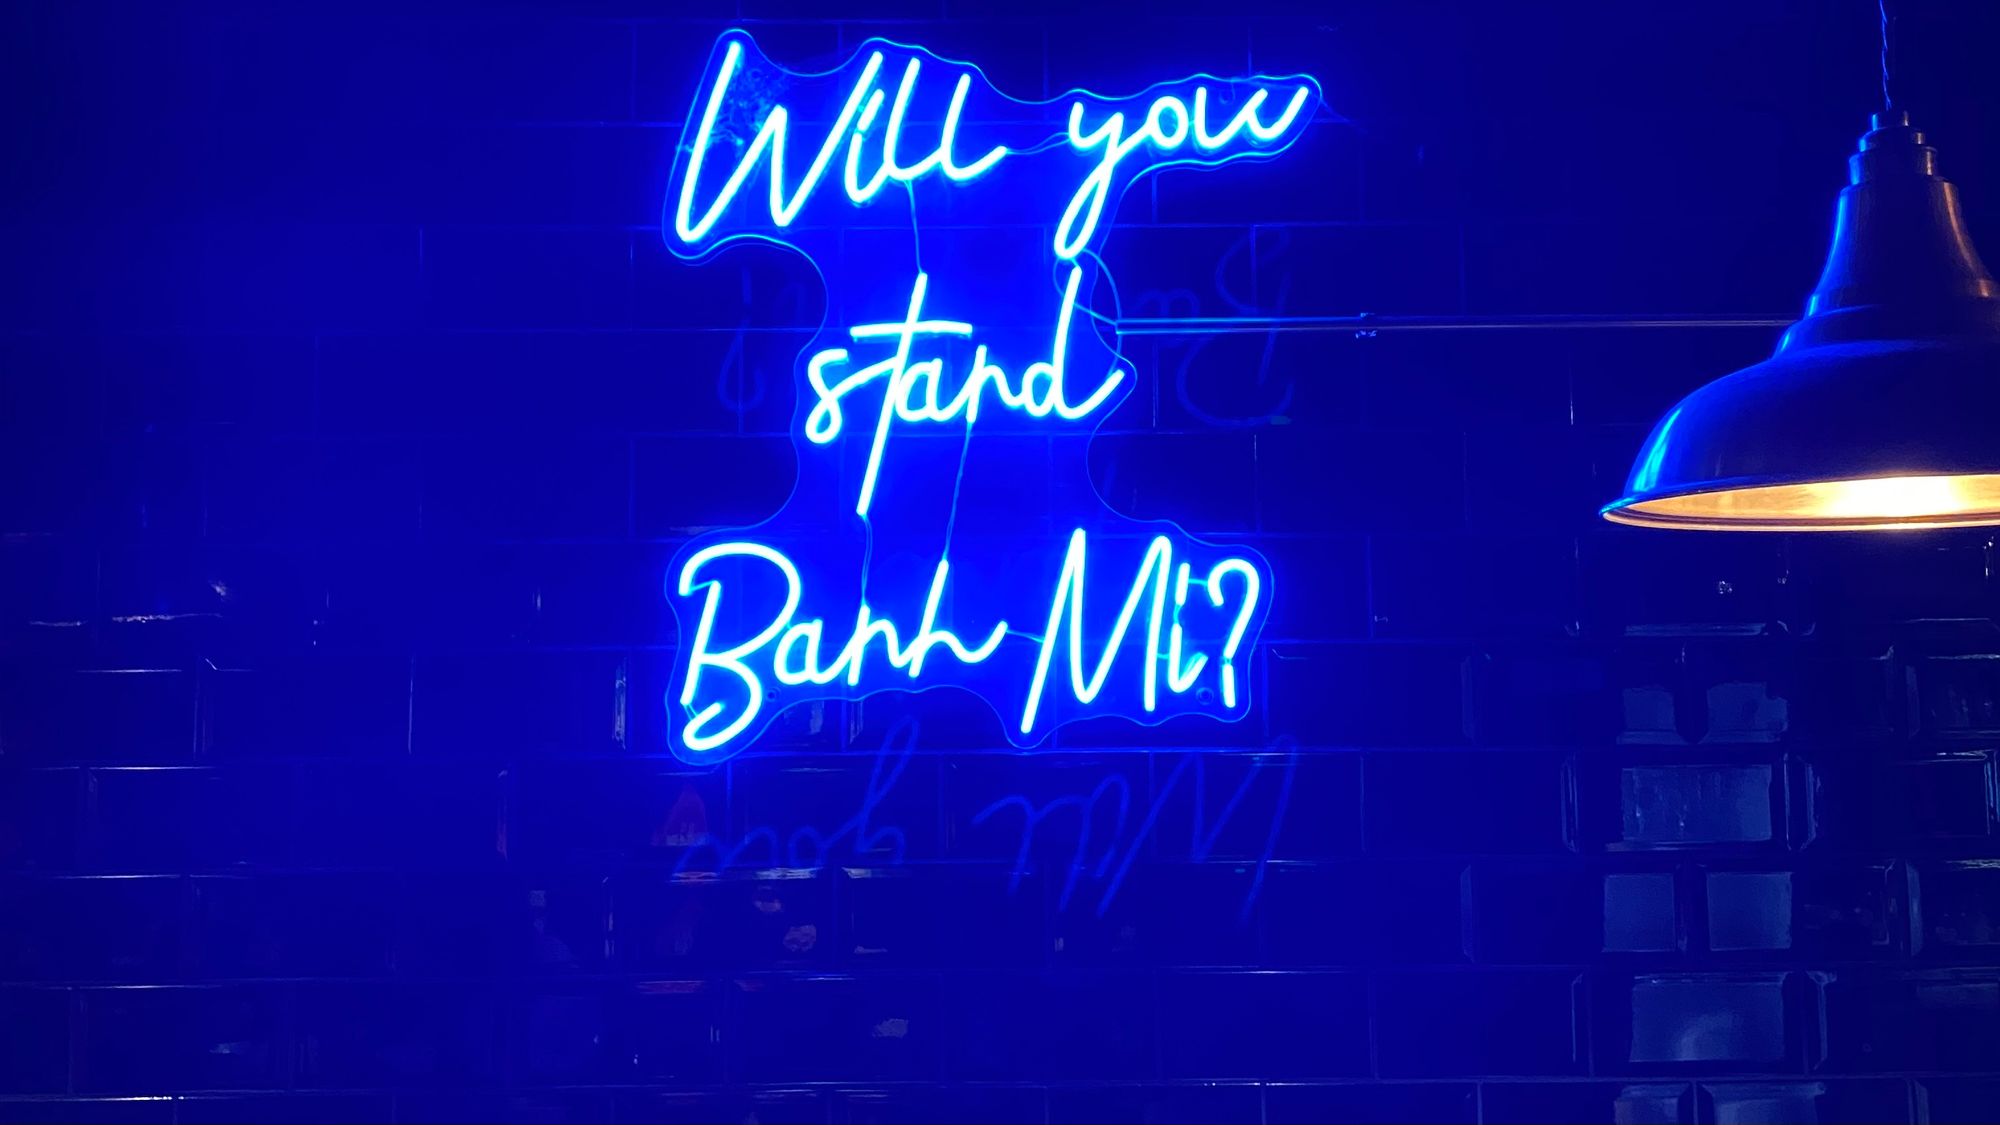 A neon sign on a tiled wall reads "Will you stand Bánh Mì?"